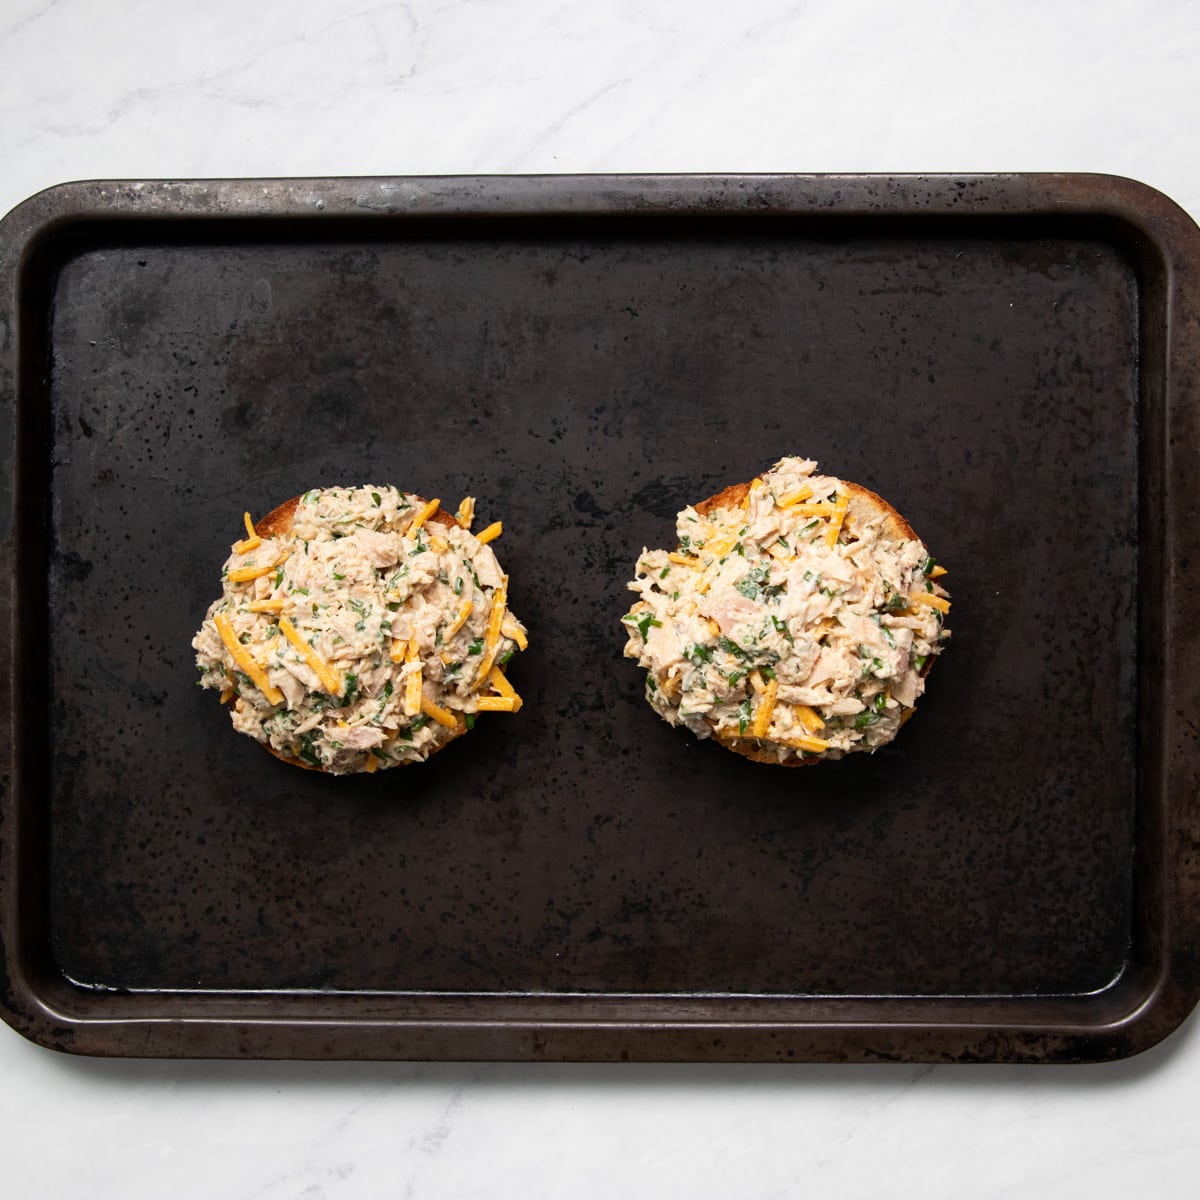 Prepared tuna salad is divided onto two toasted English muffin halves on a baking sheet